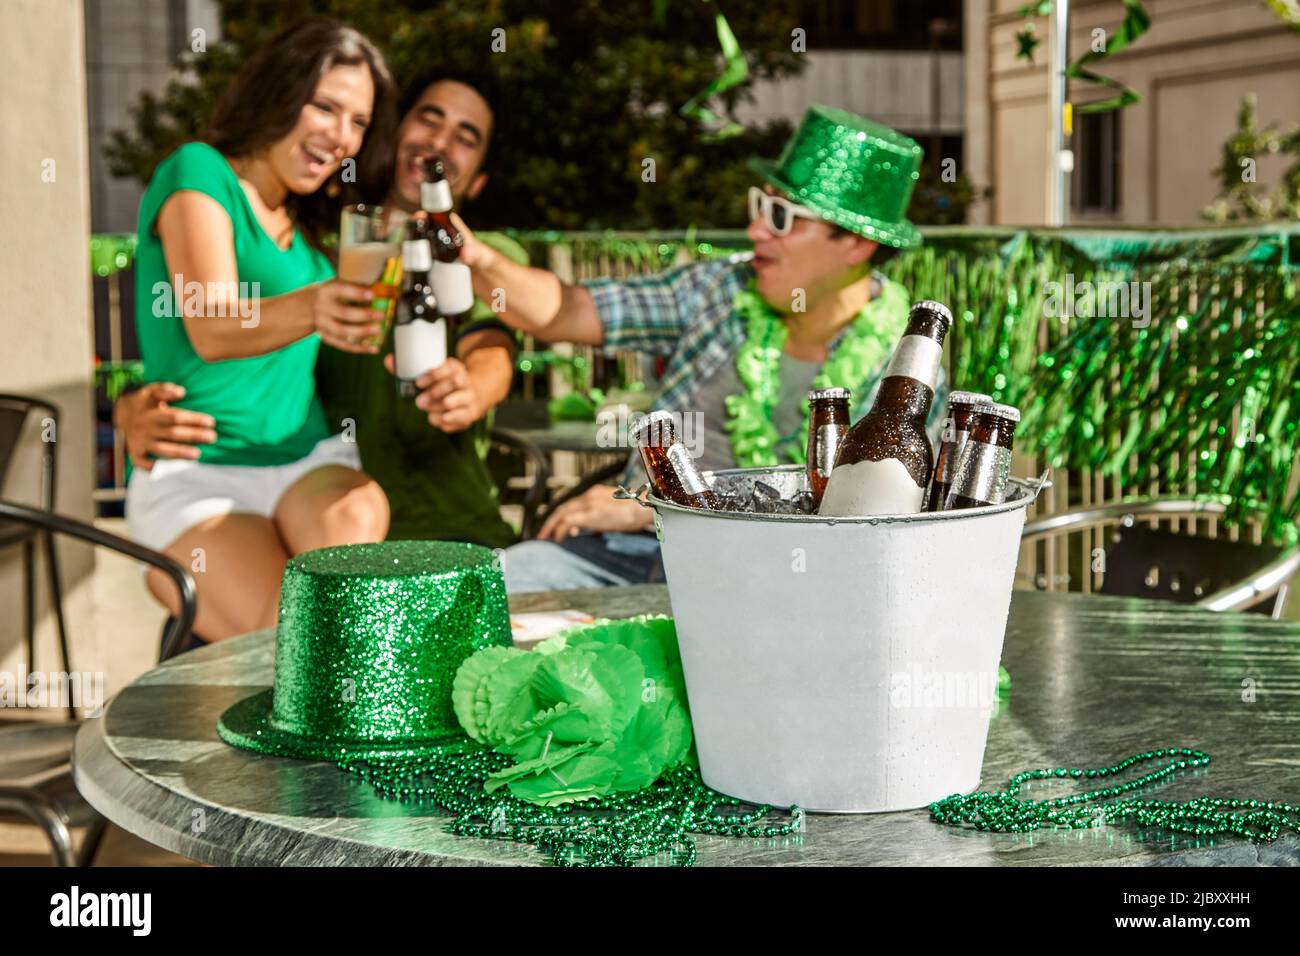 Group of friends toasting in background with a bucket of beer in foreground. Focus on foreground. Stock Photo